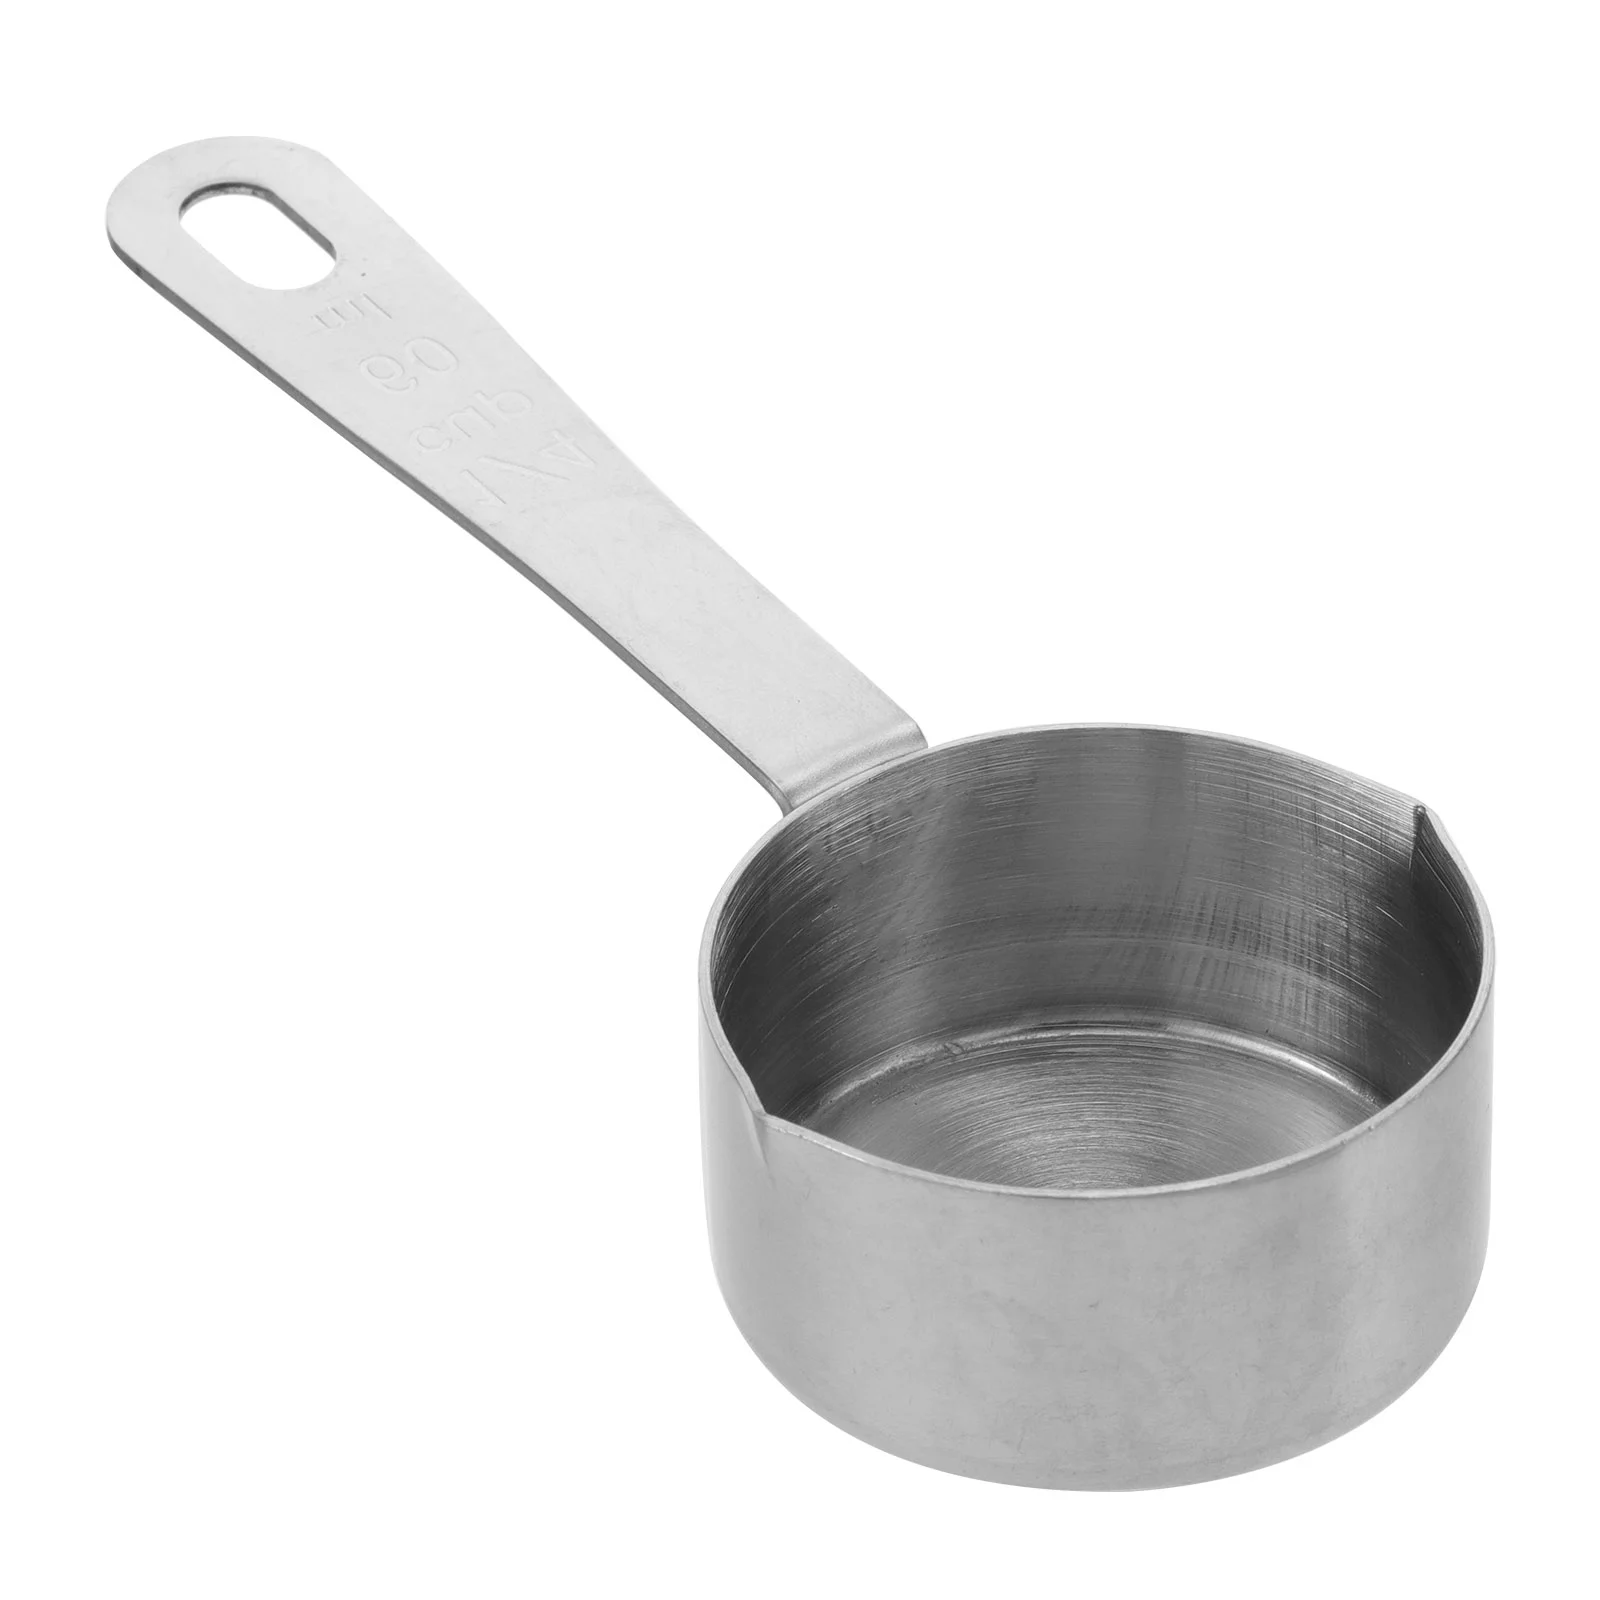 

Pot Milk Pan Saucepan Sauce Warmer Mini Butter Soup Steel Stainless Measuring Coffee Cooking Melting Cup Bowl Chocolate Kitchen